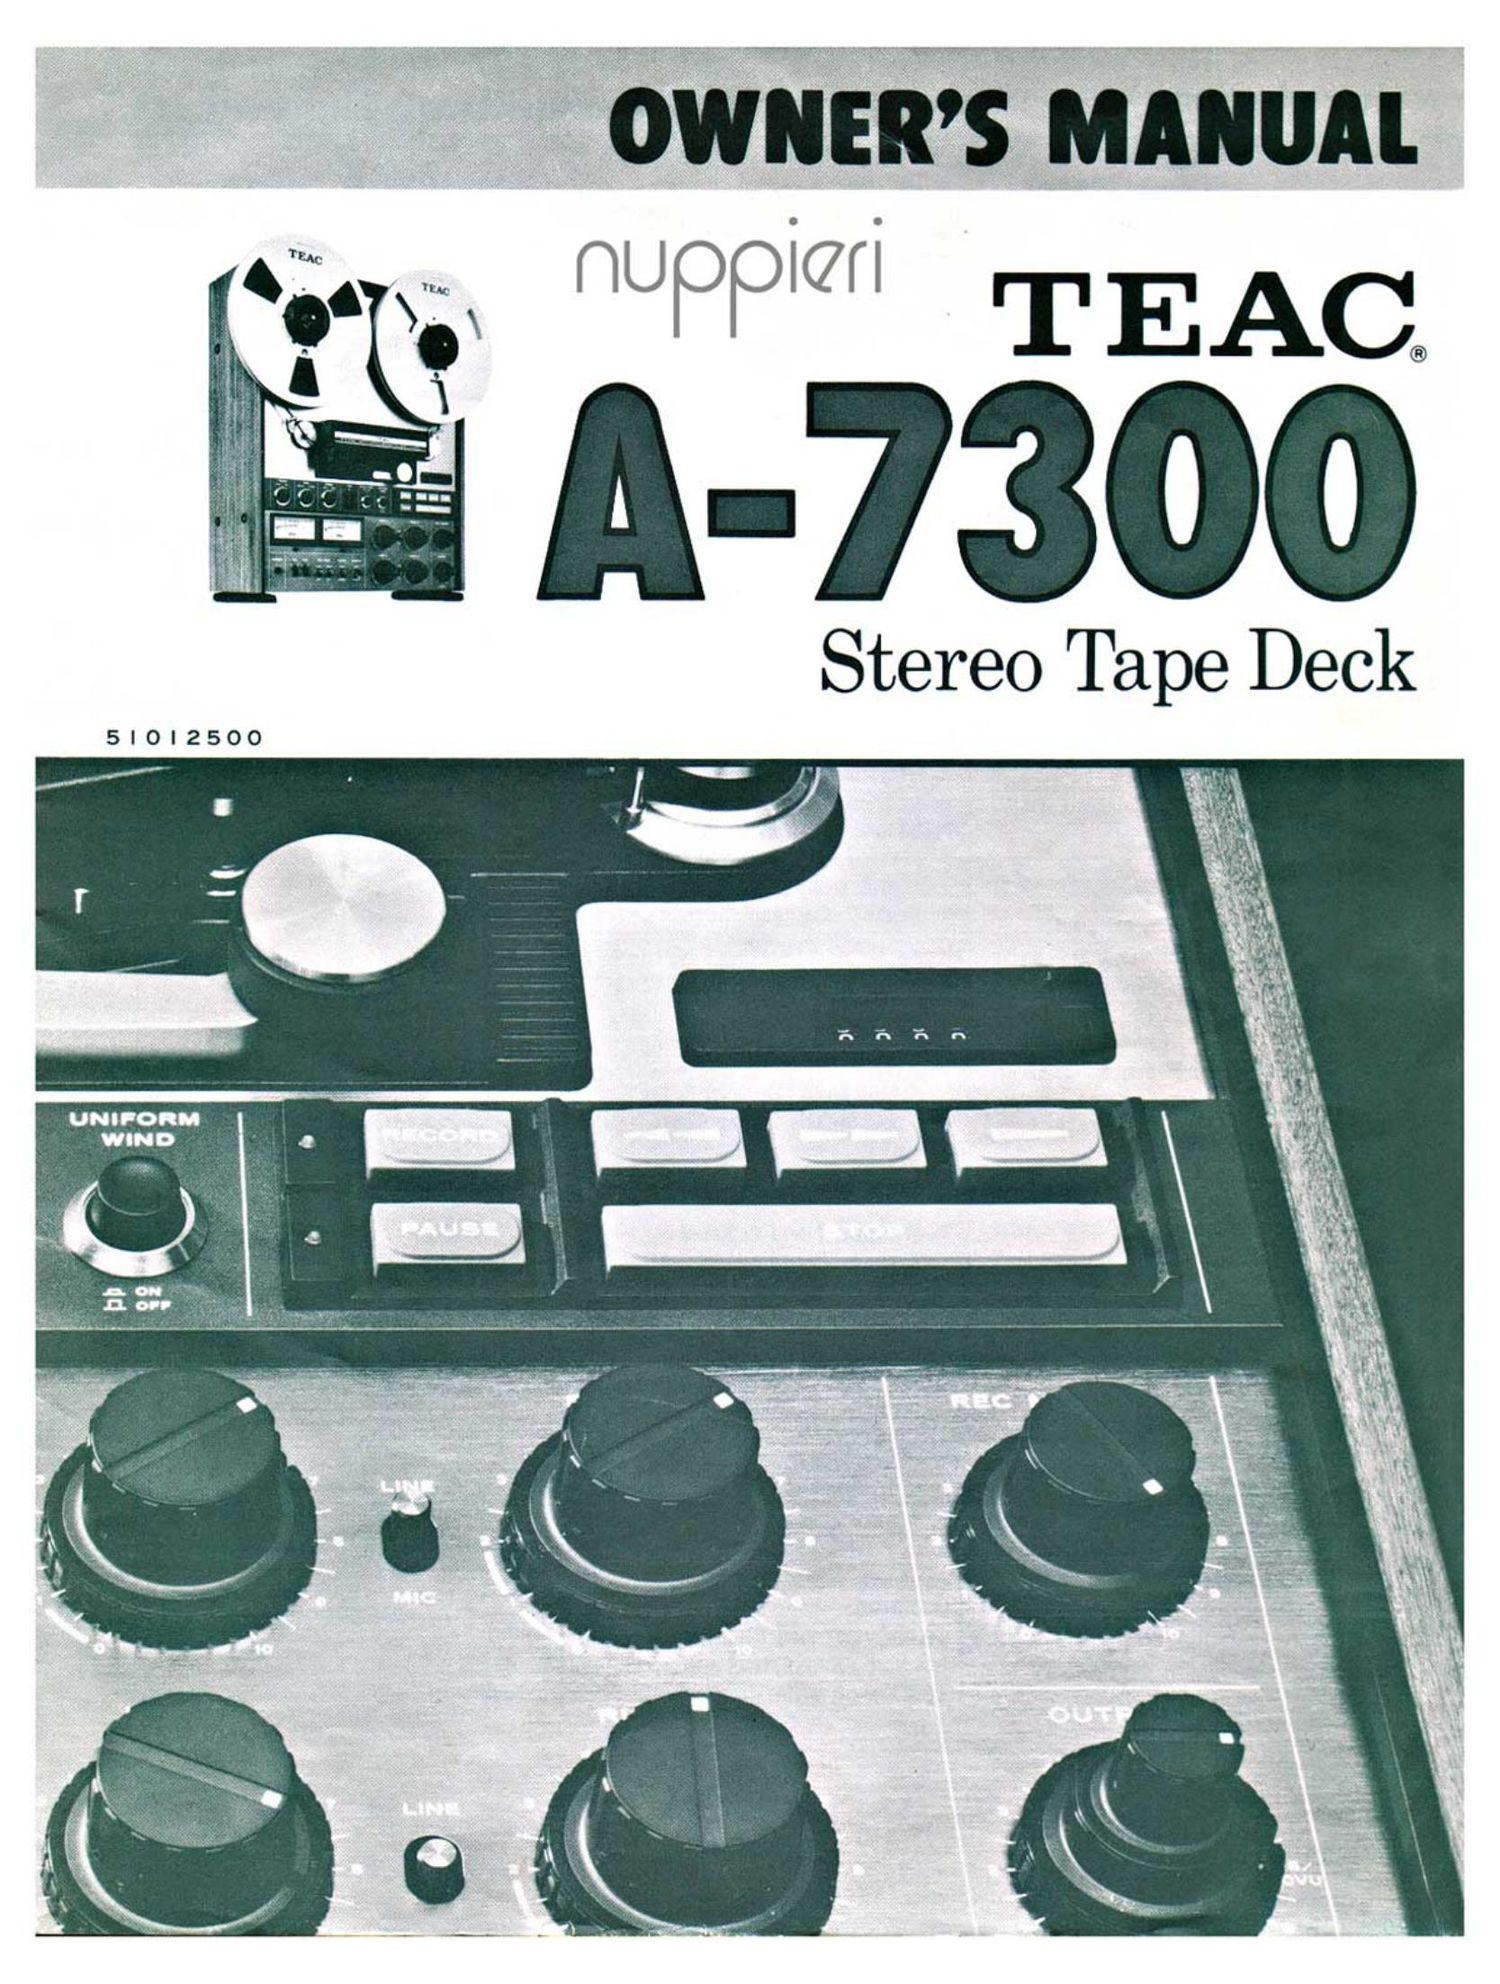 Teac A 7300 Owners Manual